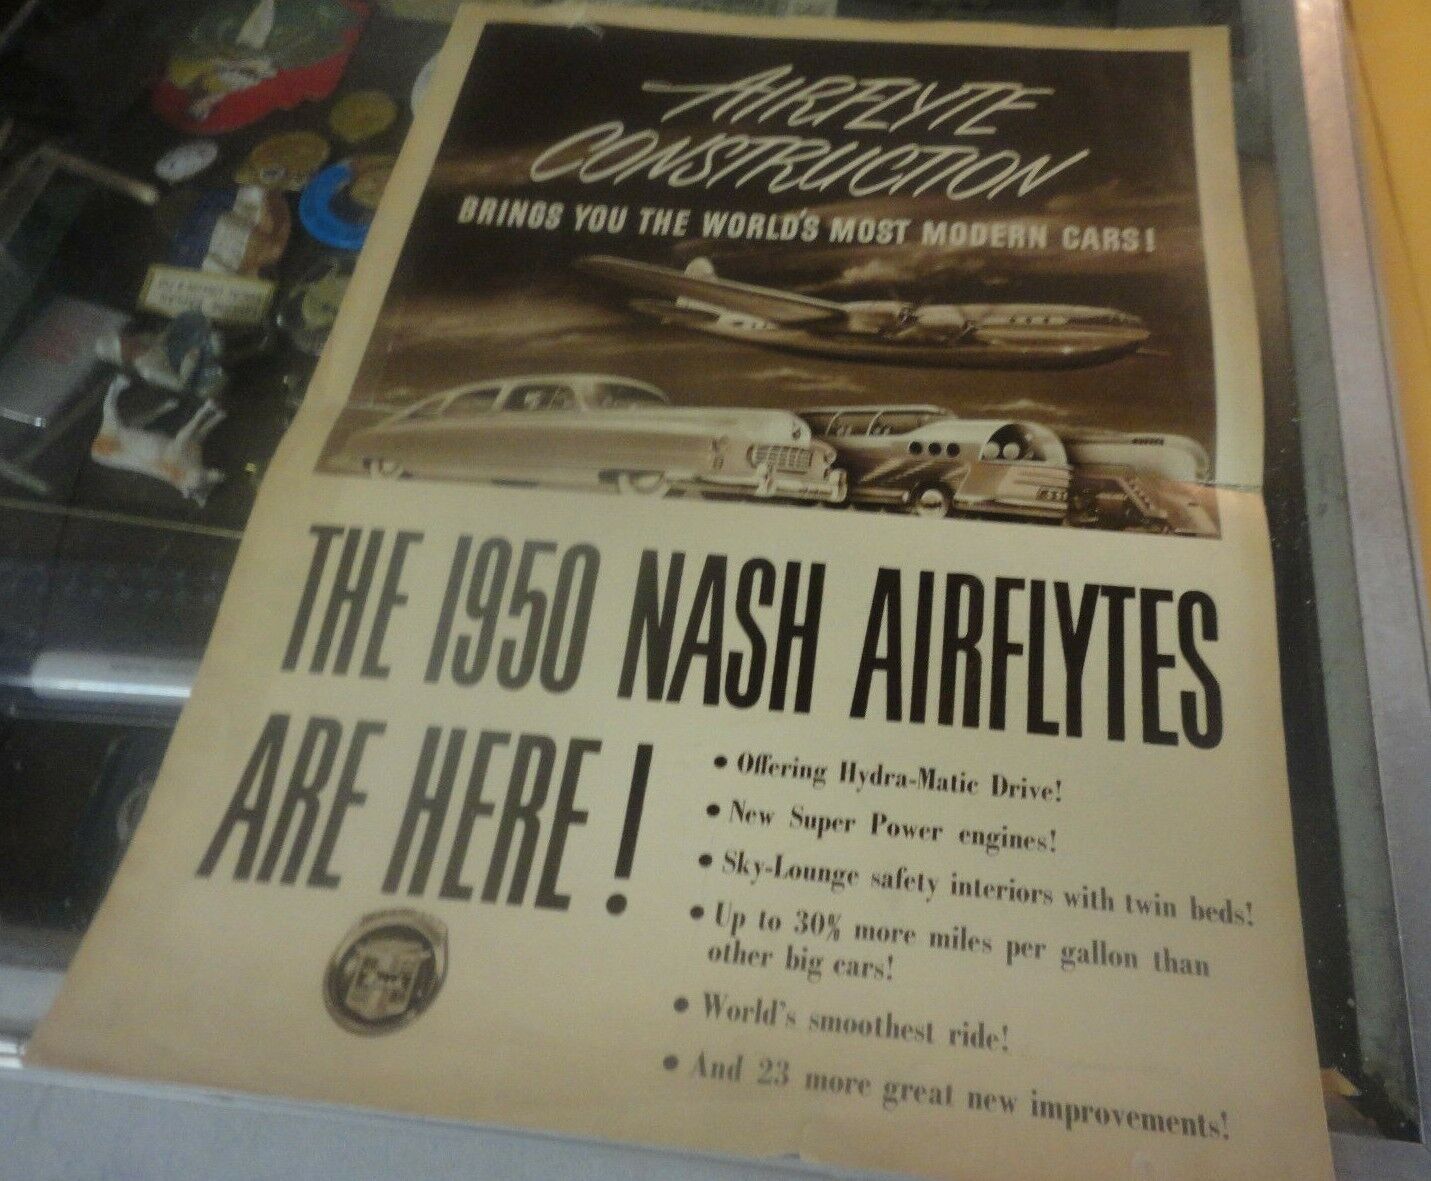 The 1950 NASH Airflytes are Here Car Brochure Hydra Matic Drive